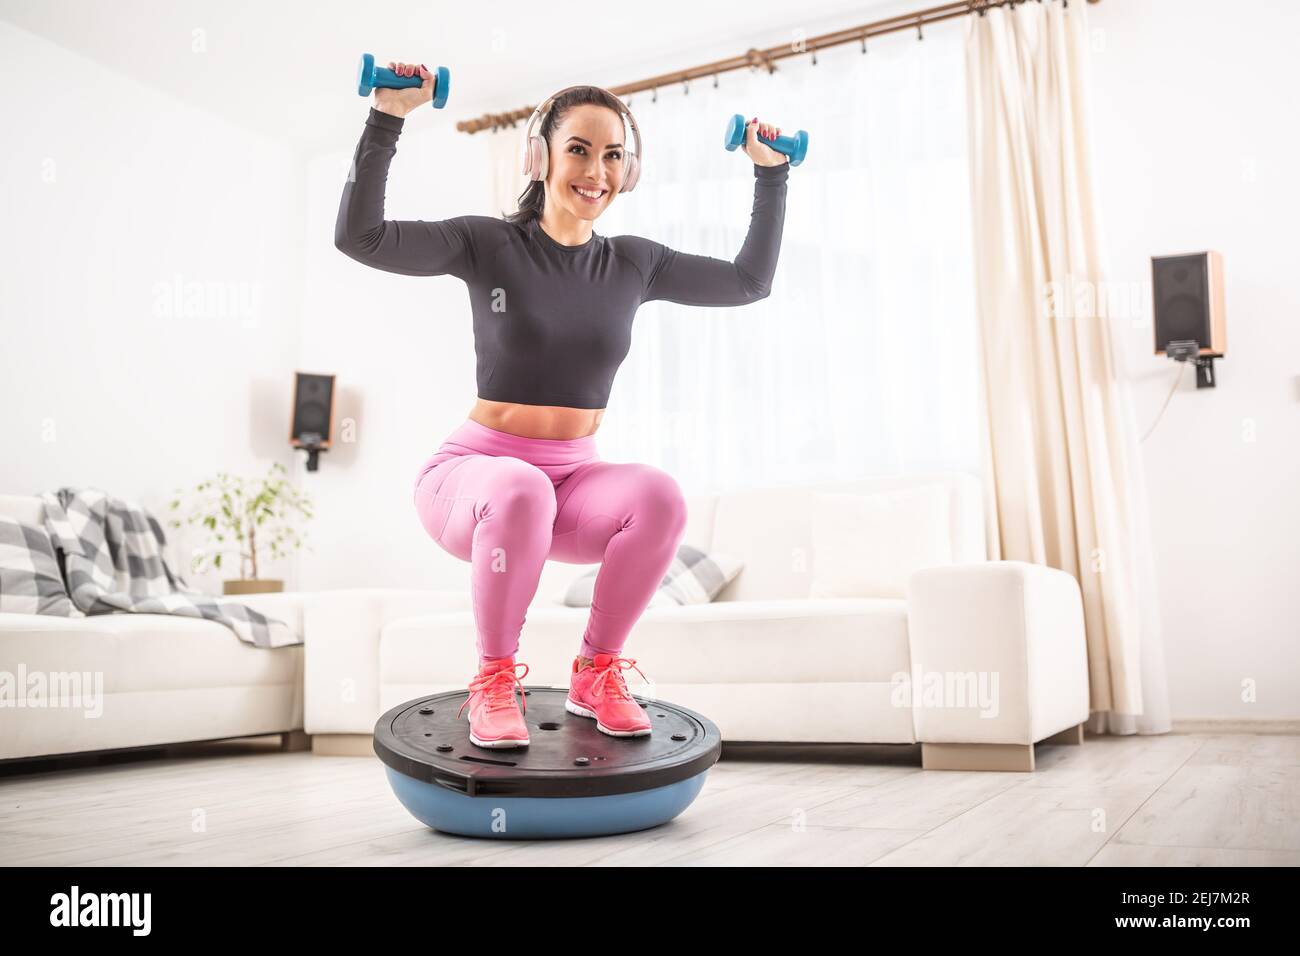 Fit beautiful woman in a training outfit and headphones squats at home on a balance ball holding dumbells upwards. Stock Photo